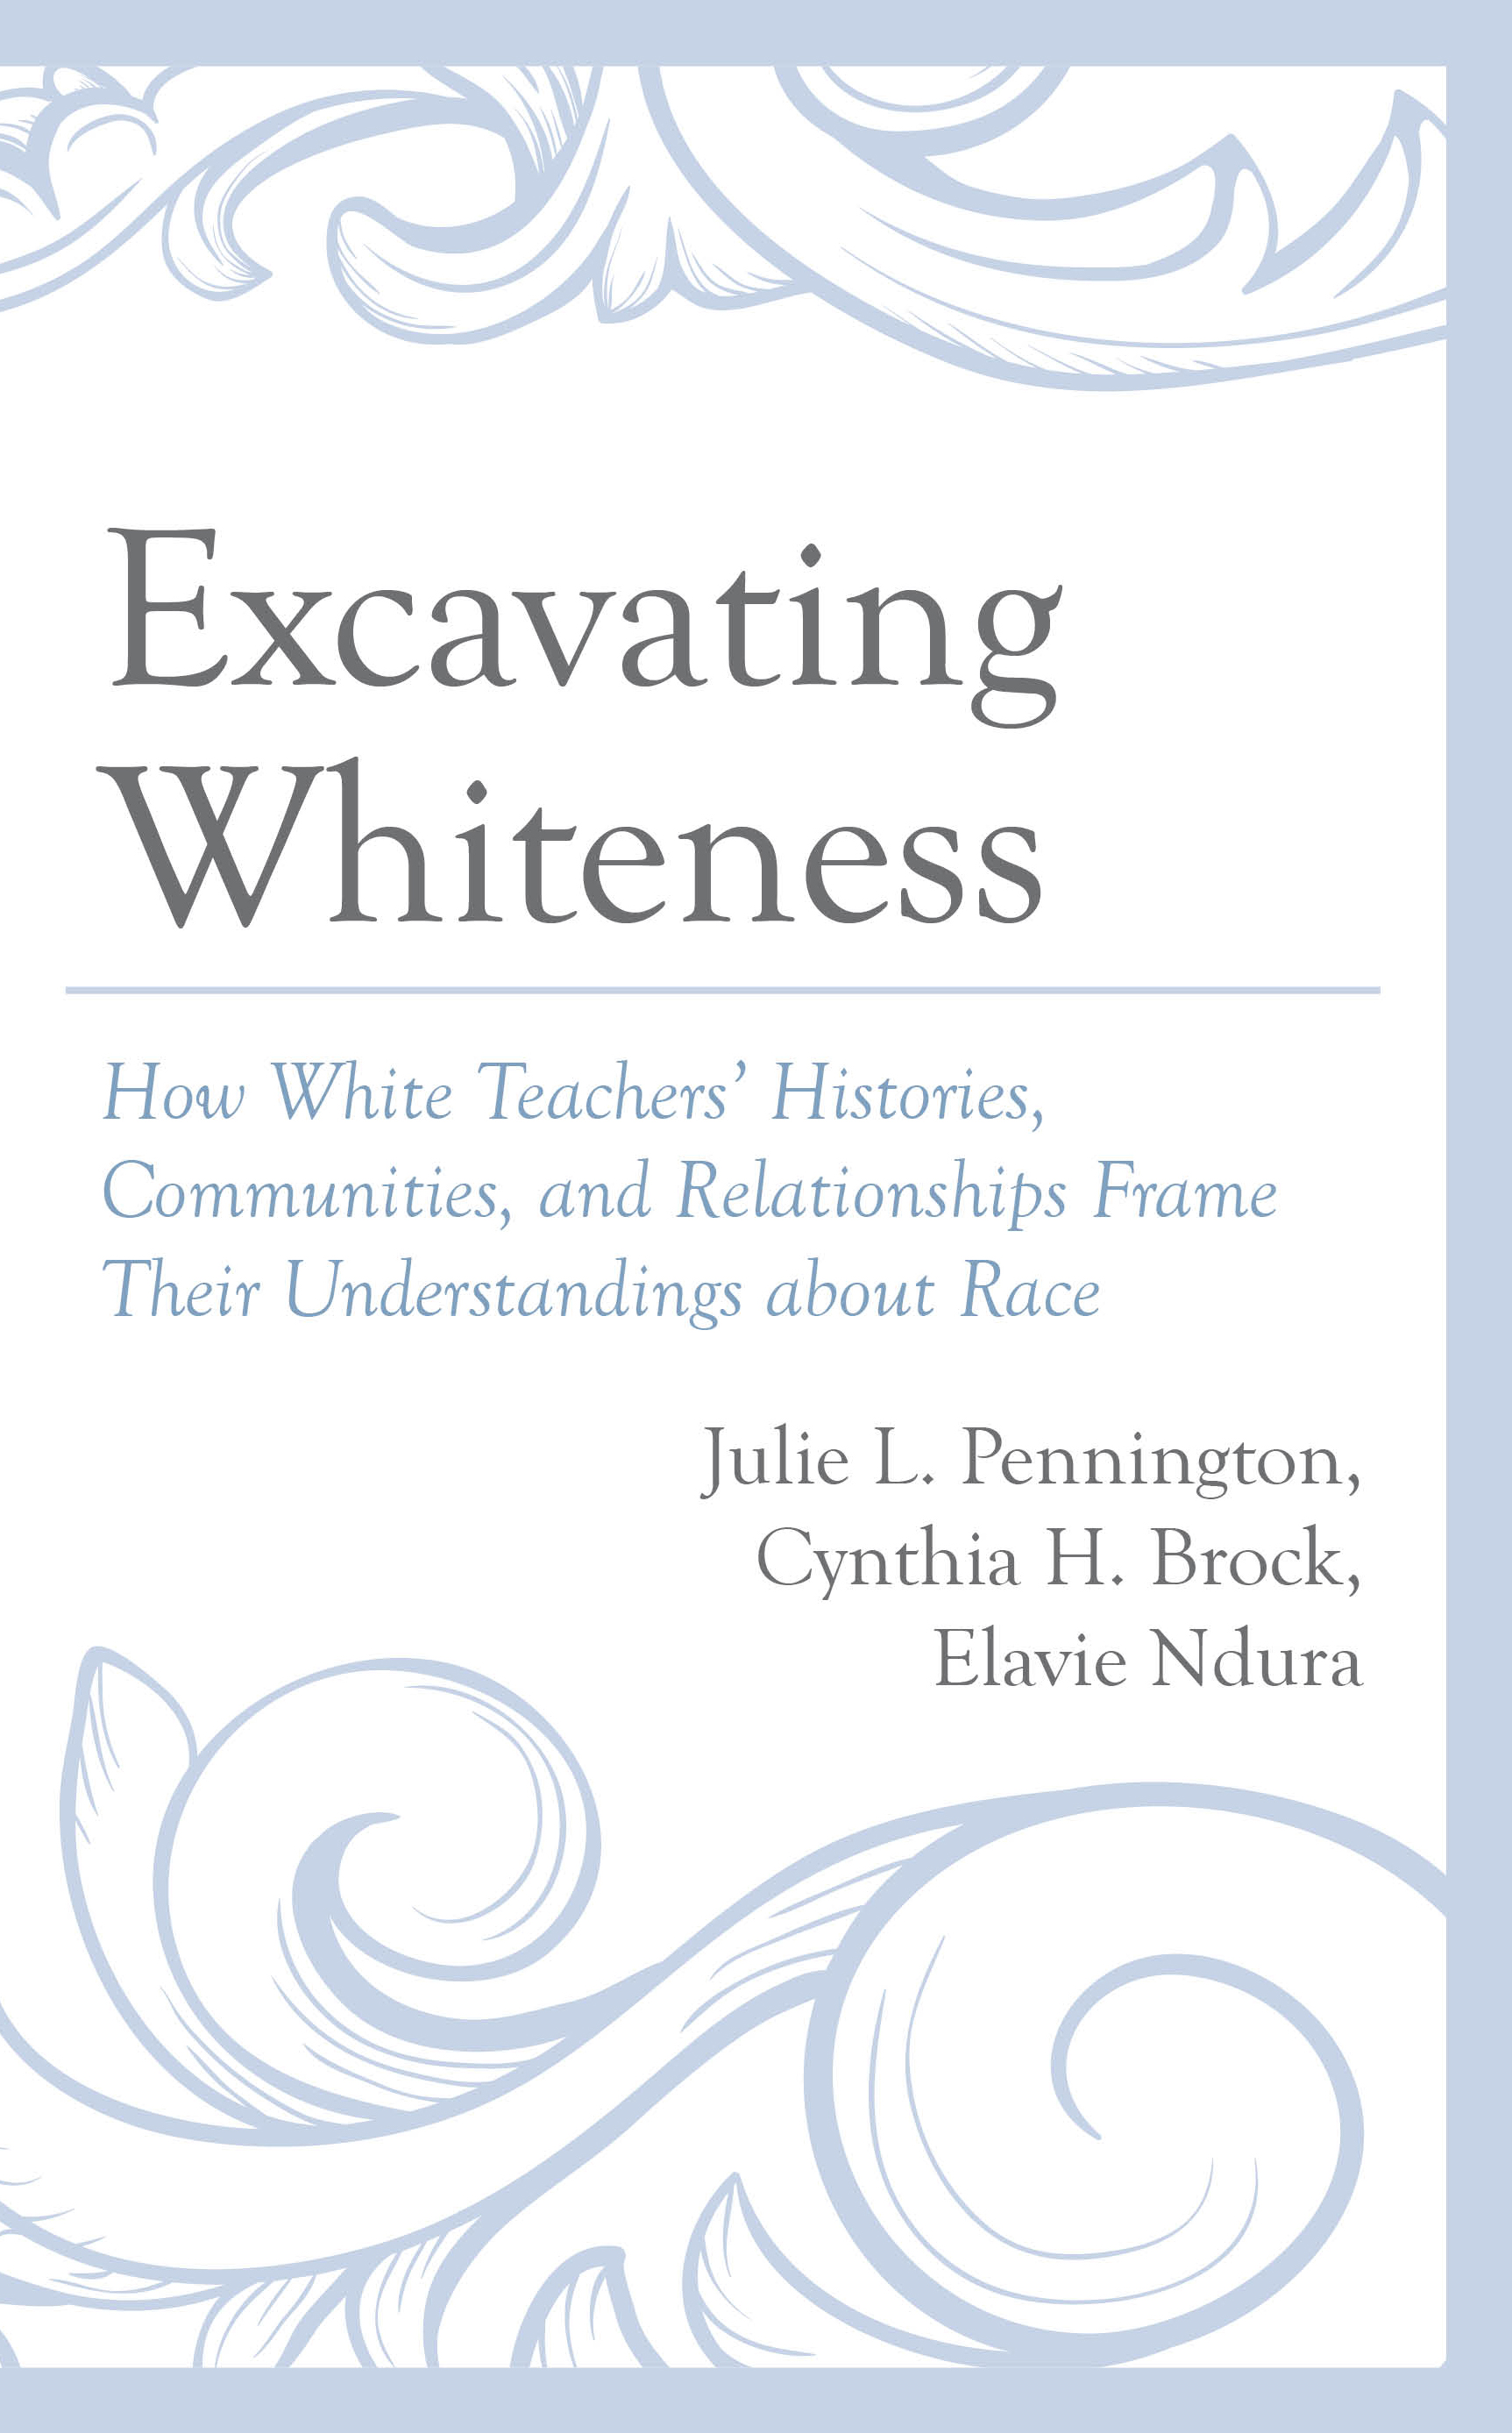 Excavating Whiteness: How White Teachers’ Histories, Communities, and Relationships Frame Their Understandings about Race